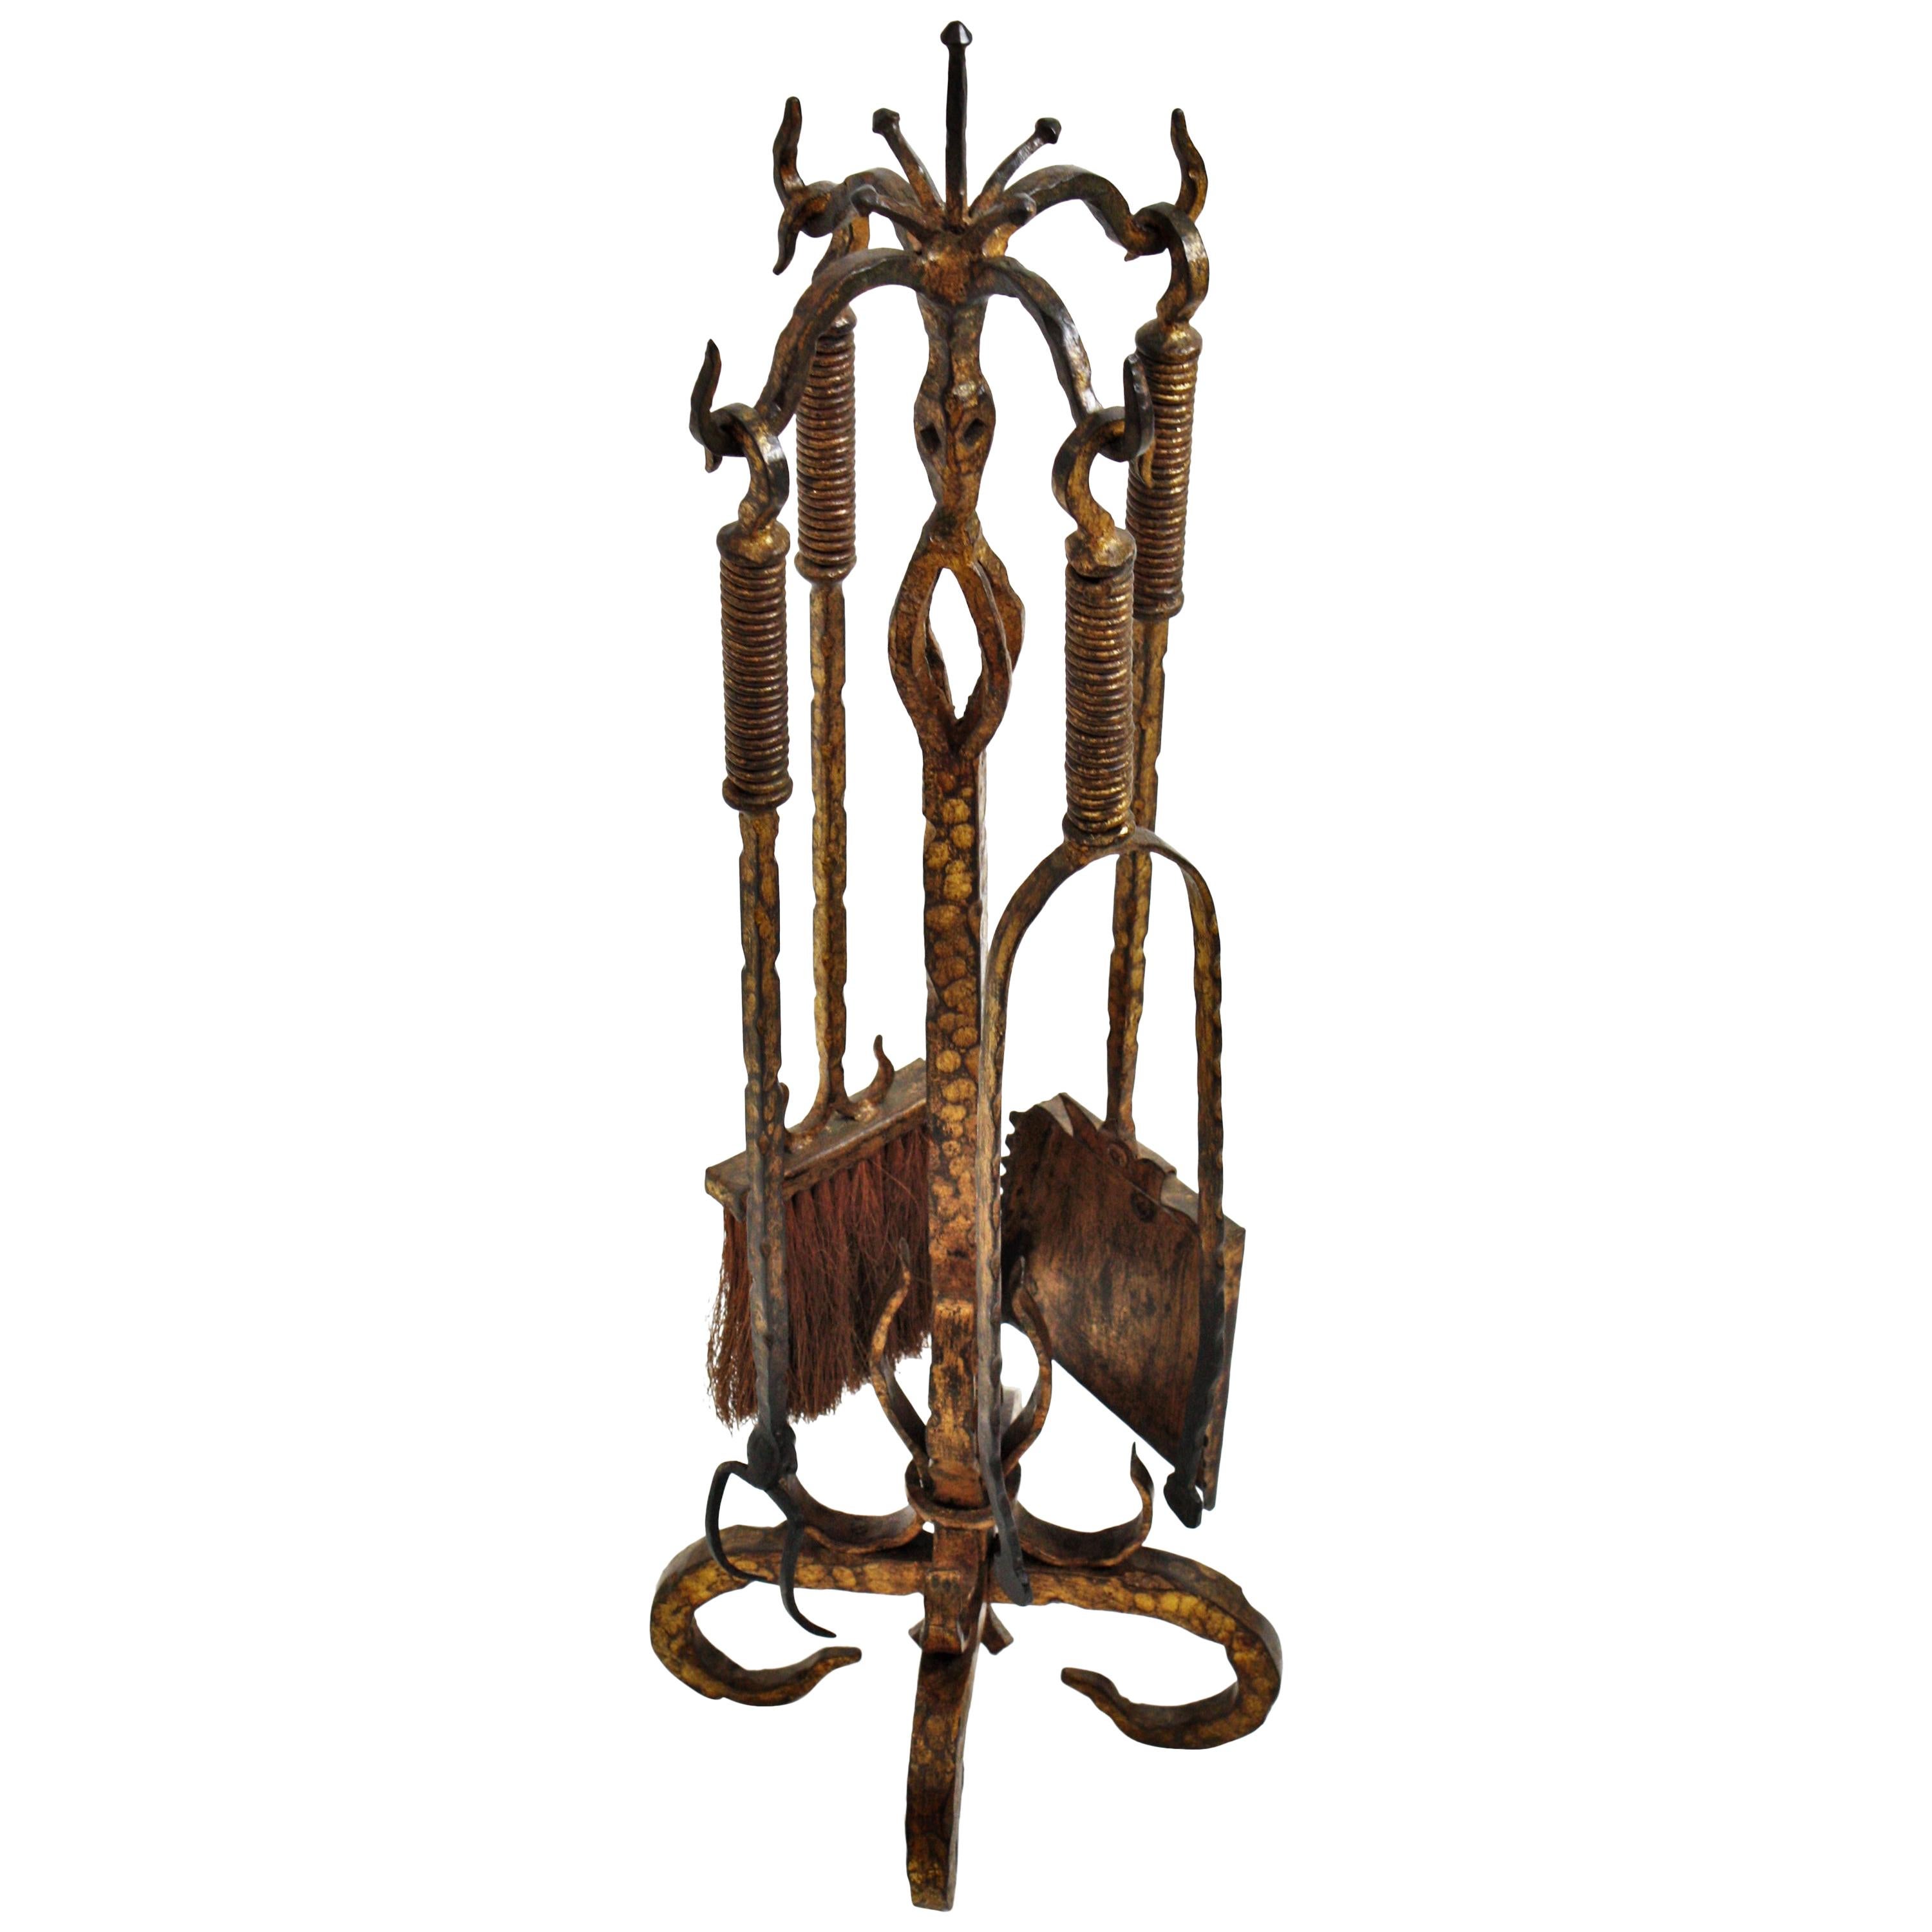 Spanish Wrought Gilt Iron Gothic Revival Fireplace Tool Set Stand, 19th Century